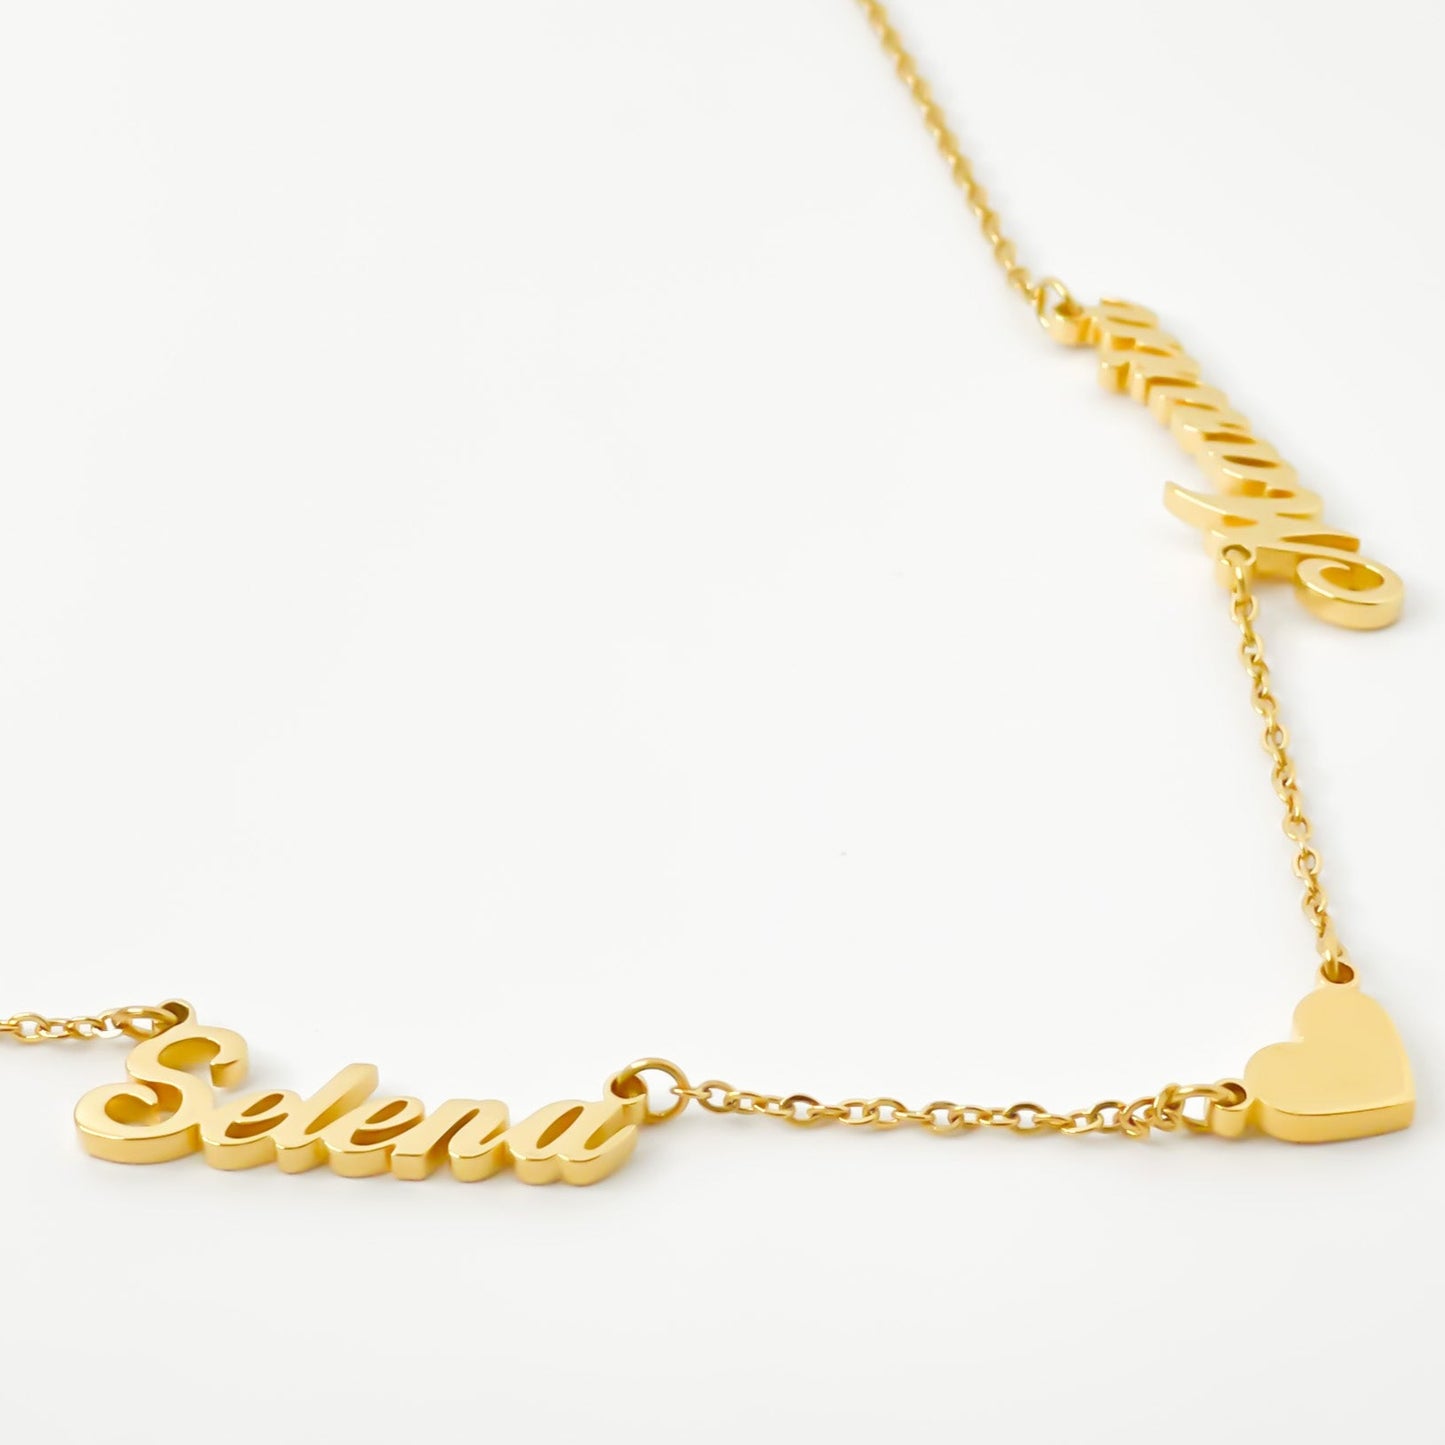 THE PERSONALISED TWO NAME HEART NECKLACE